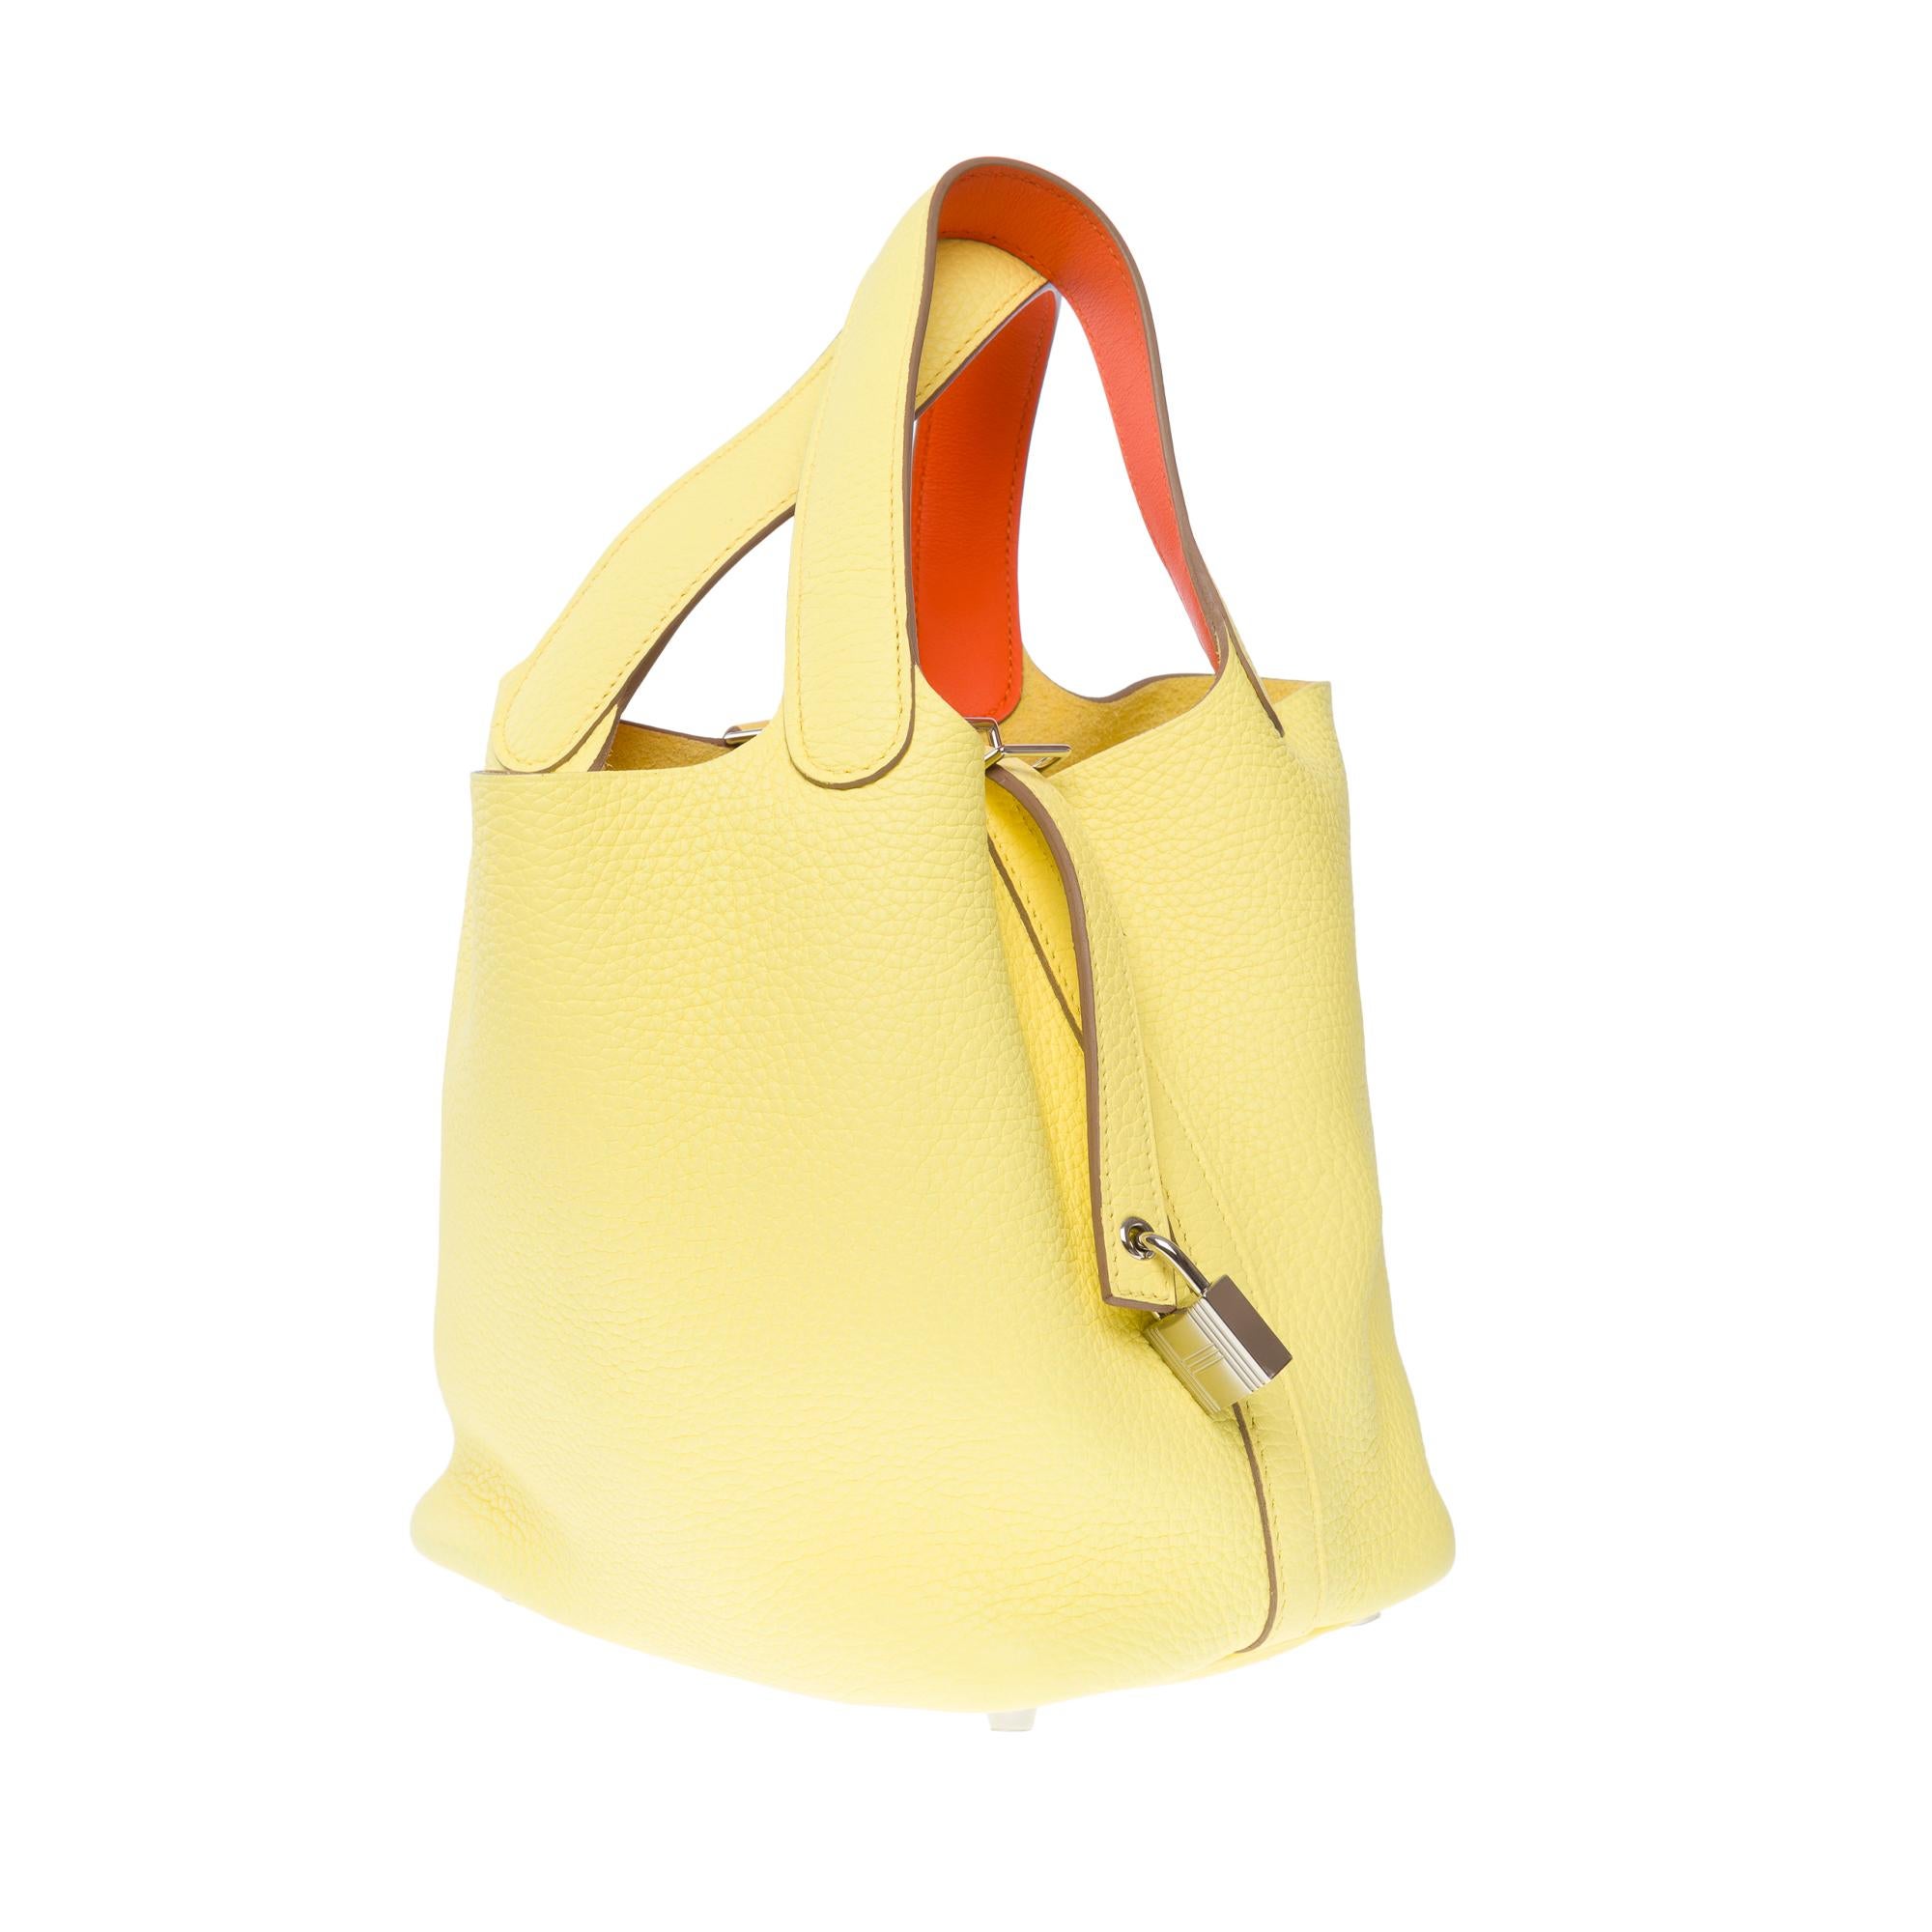 New Hermès Picotin Lock 18 Eclat in Limoncello Taurillon Clemence leather , SHW For Sale 1